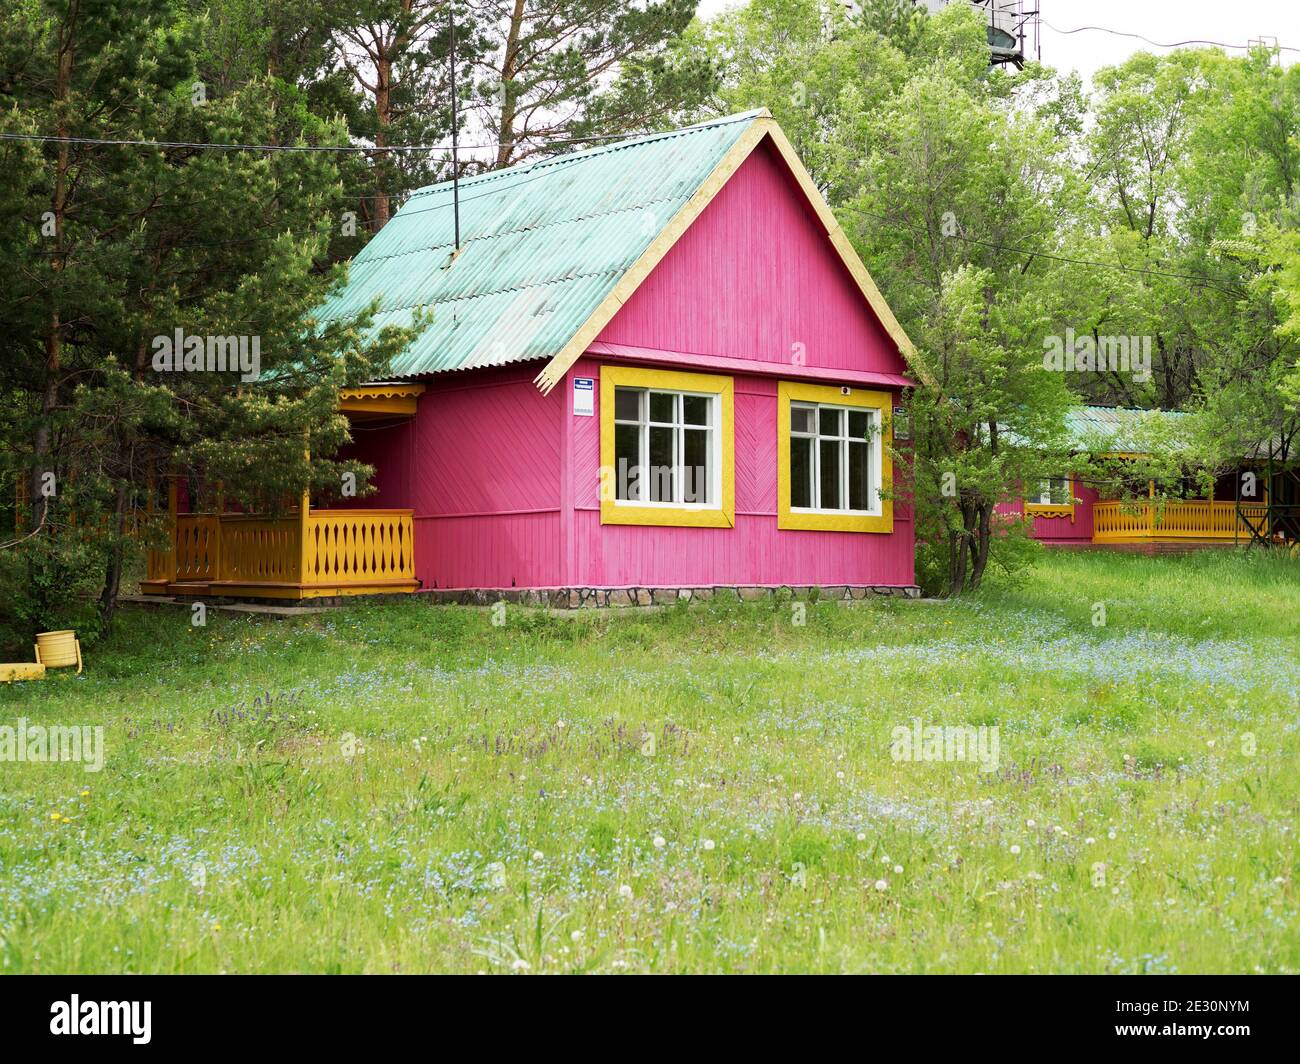 A small wooden guest house stands in the garden among the trees on a summer day. Stock Photo